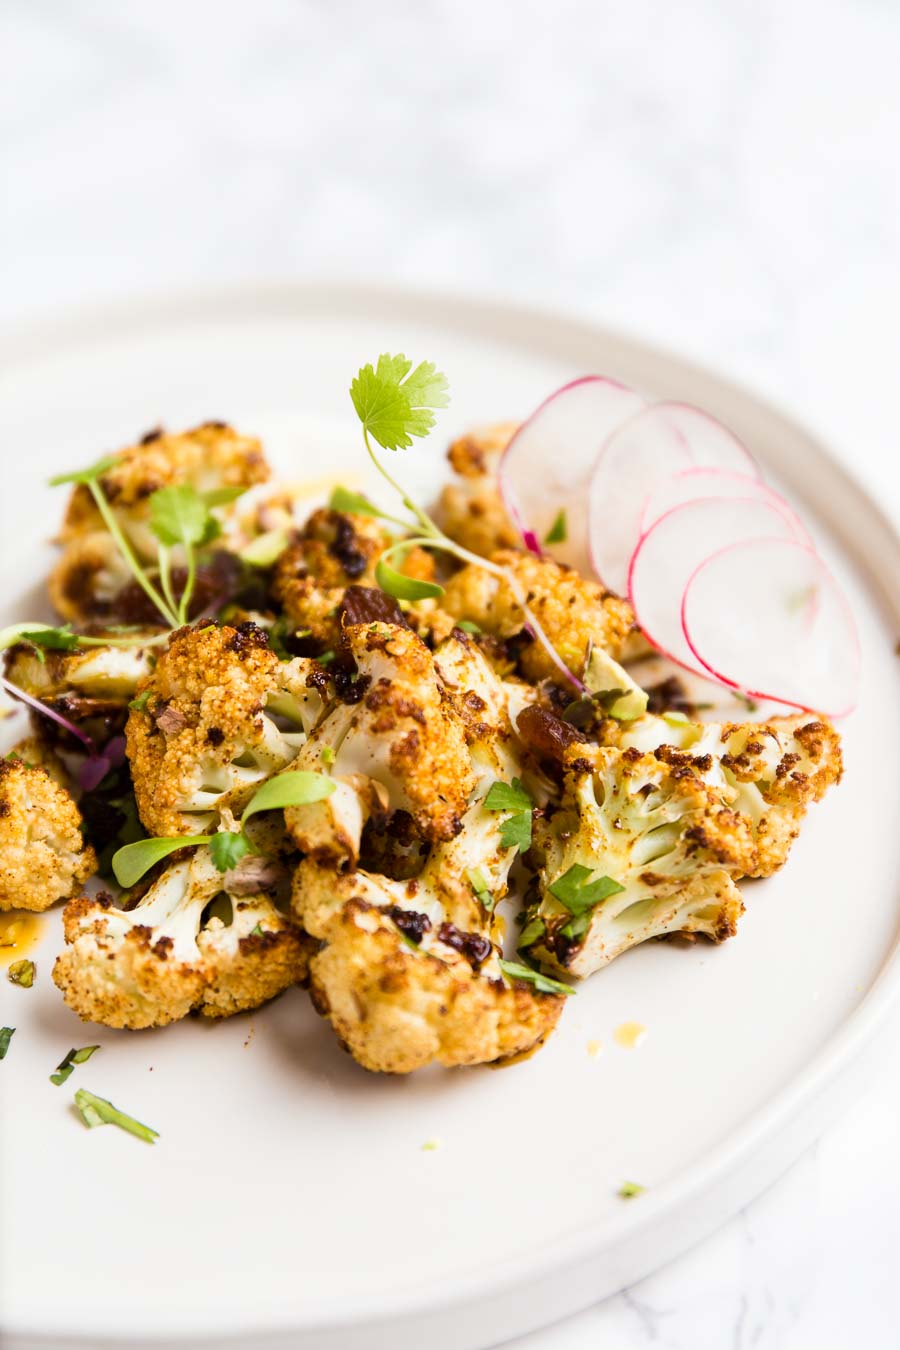 Cooked curried cauliflower served on a shallow white plate, garnished with herbs and wafer thin slices of radish